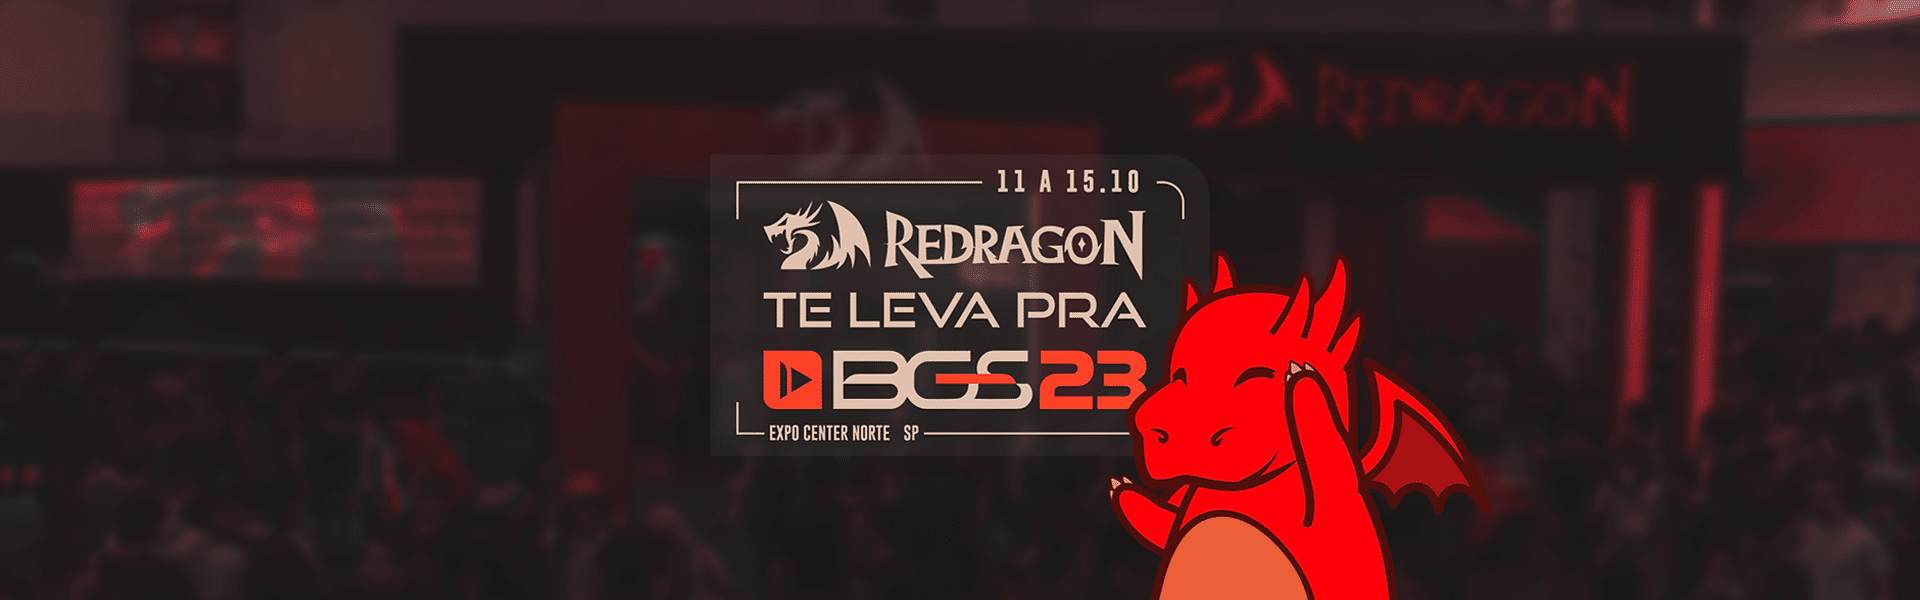 Redragon will take you to BGS